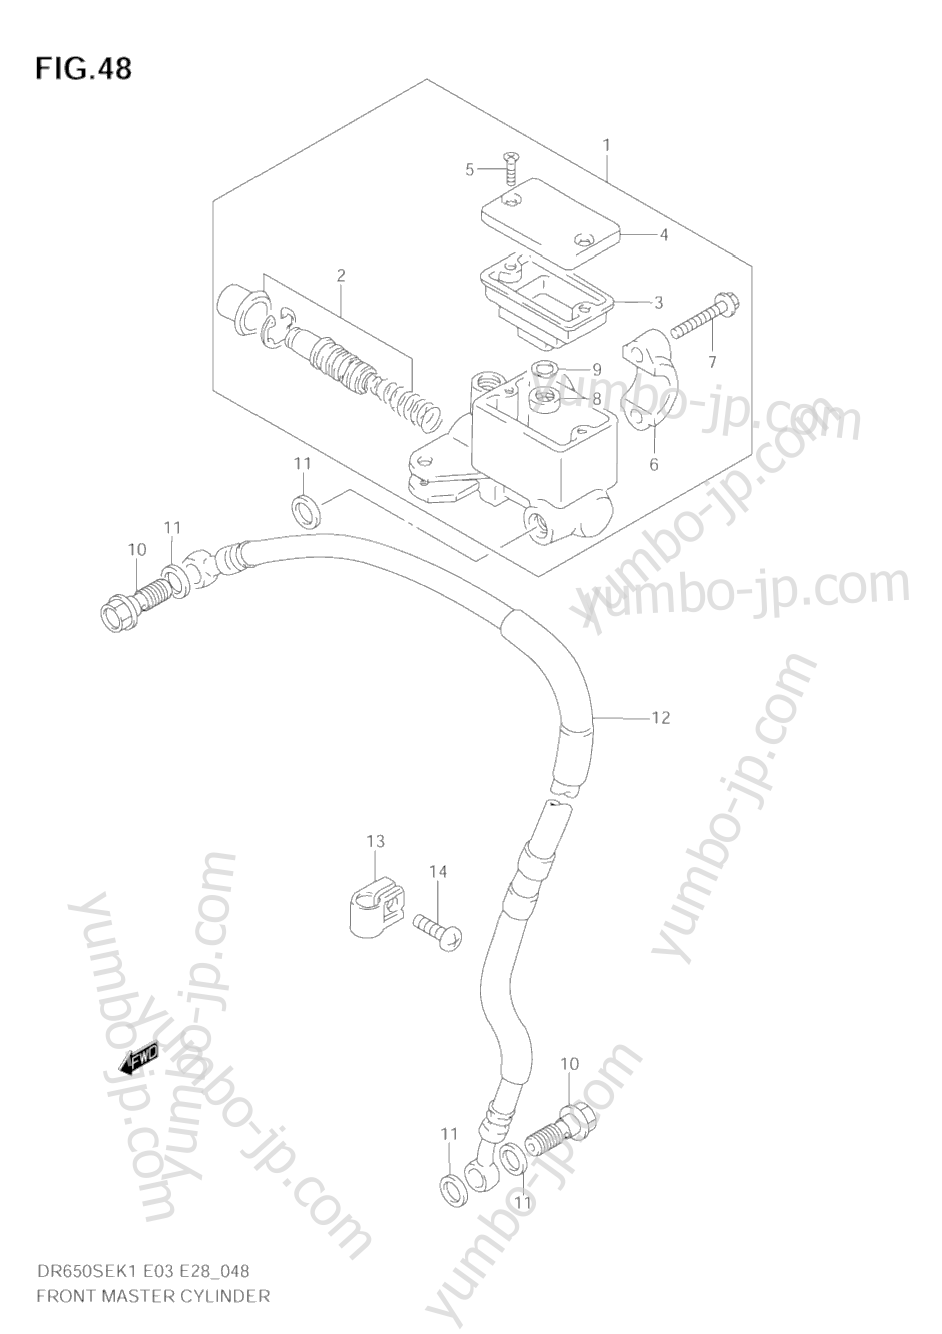 FRONT MASTER CYLINDER for motorcycles SUZUKI DR650SE 2005 year